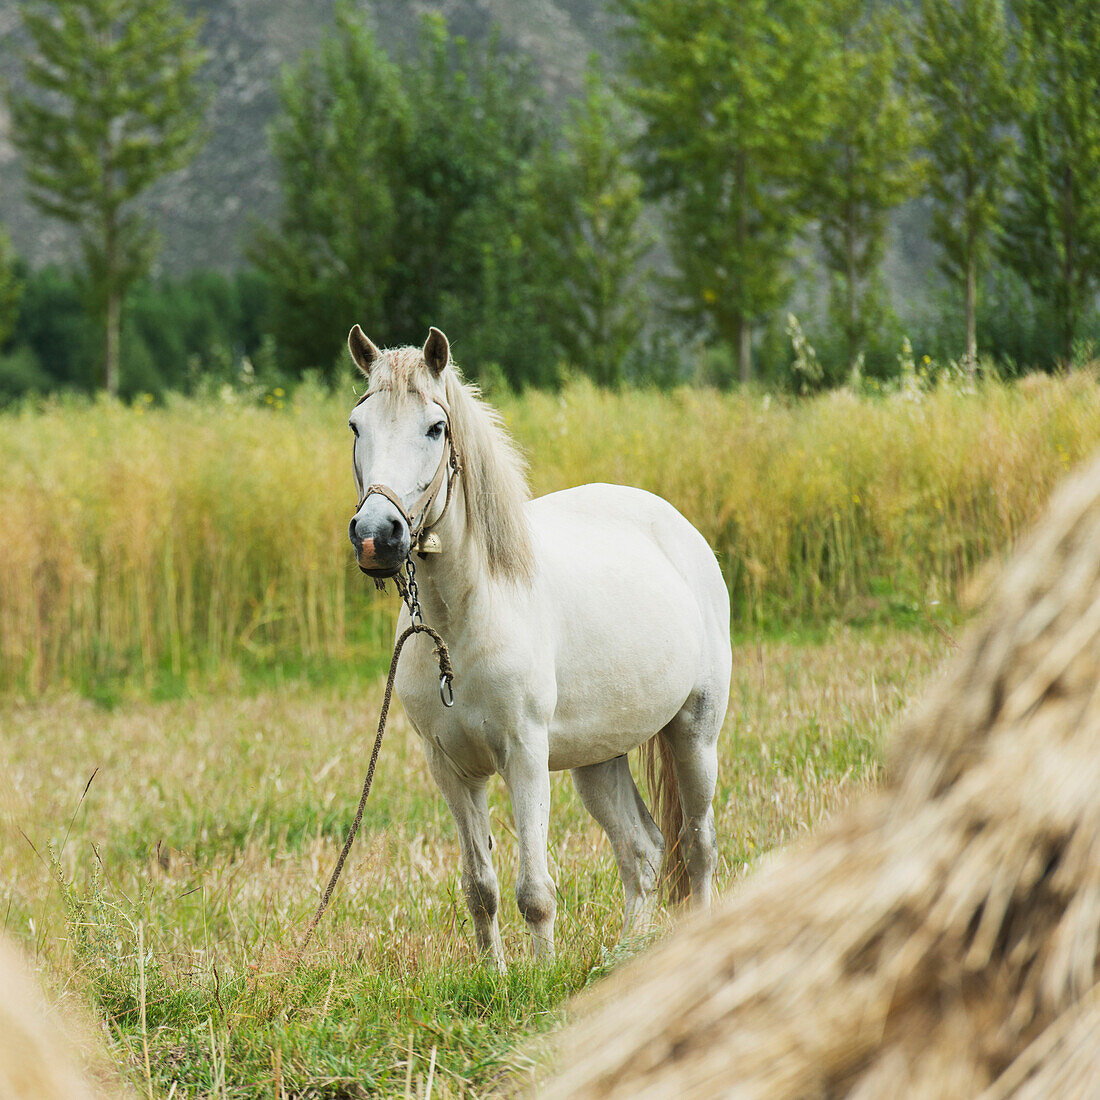 'White horse in a field;Lhasa xizang china'